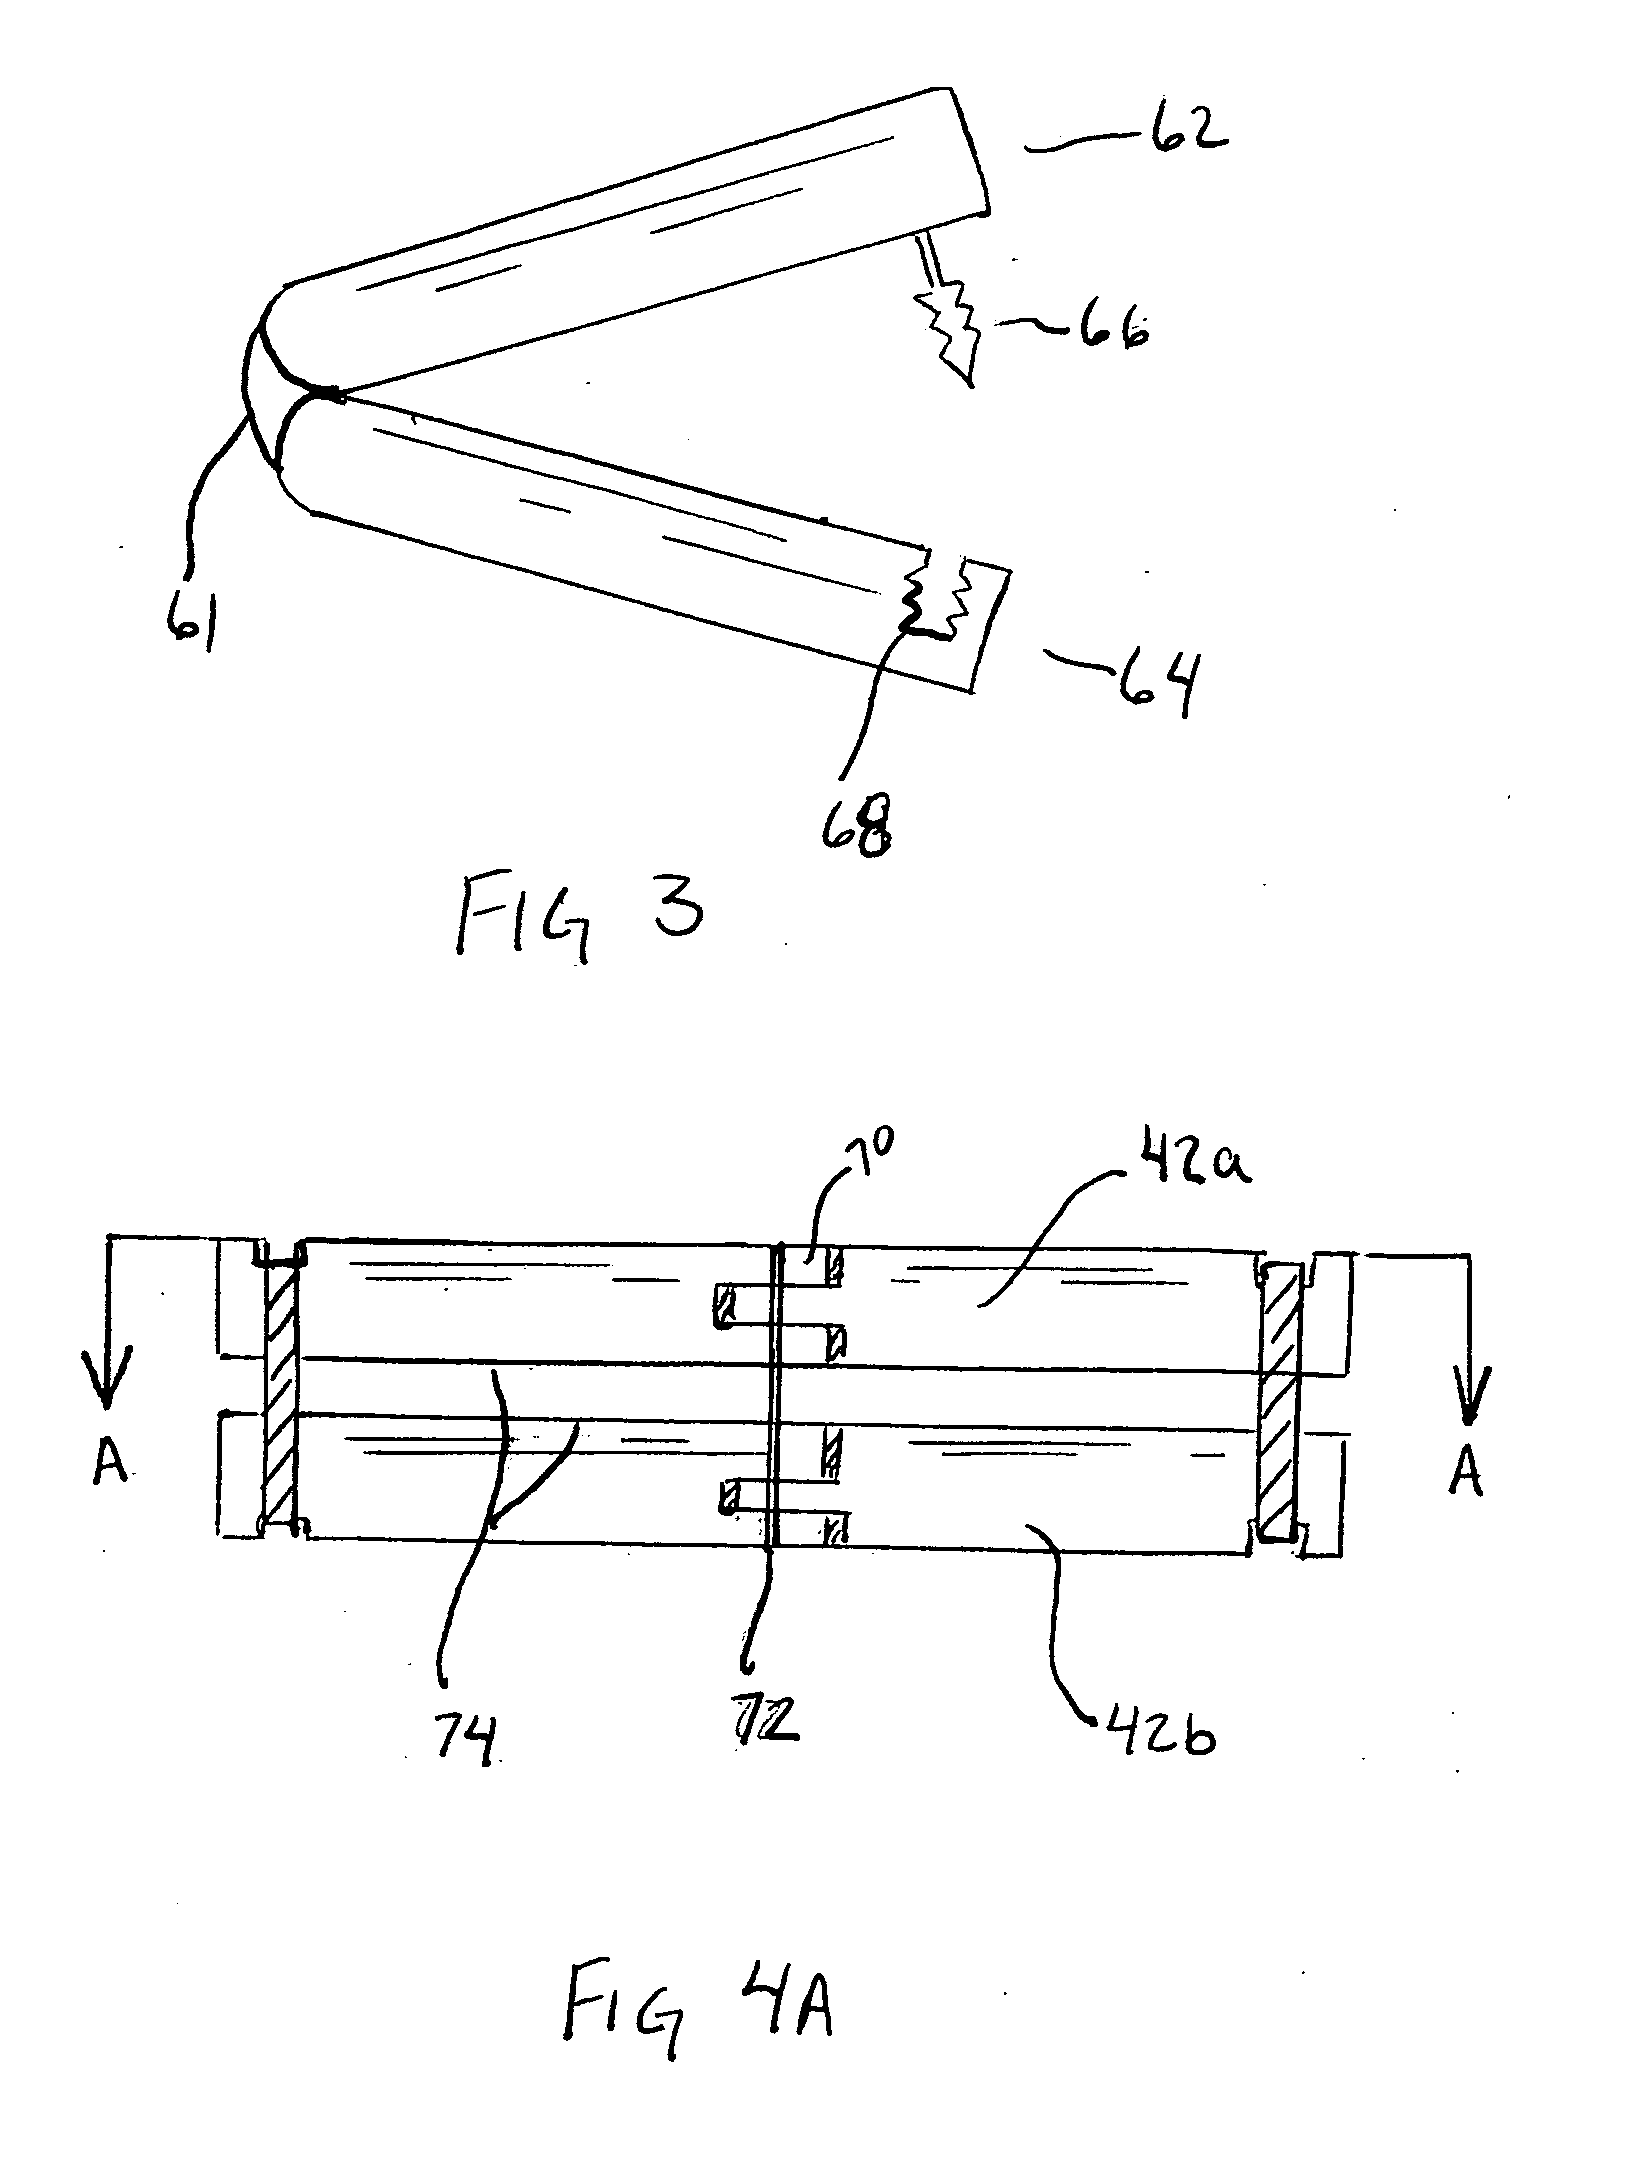 Method and apparatus for partioning an organ within the body